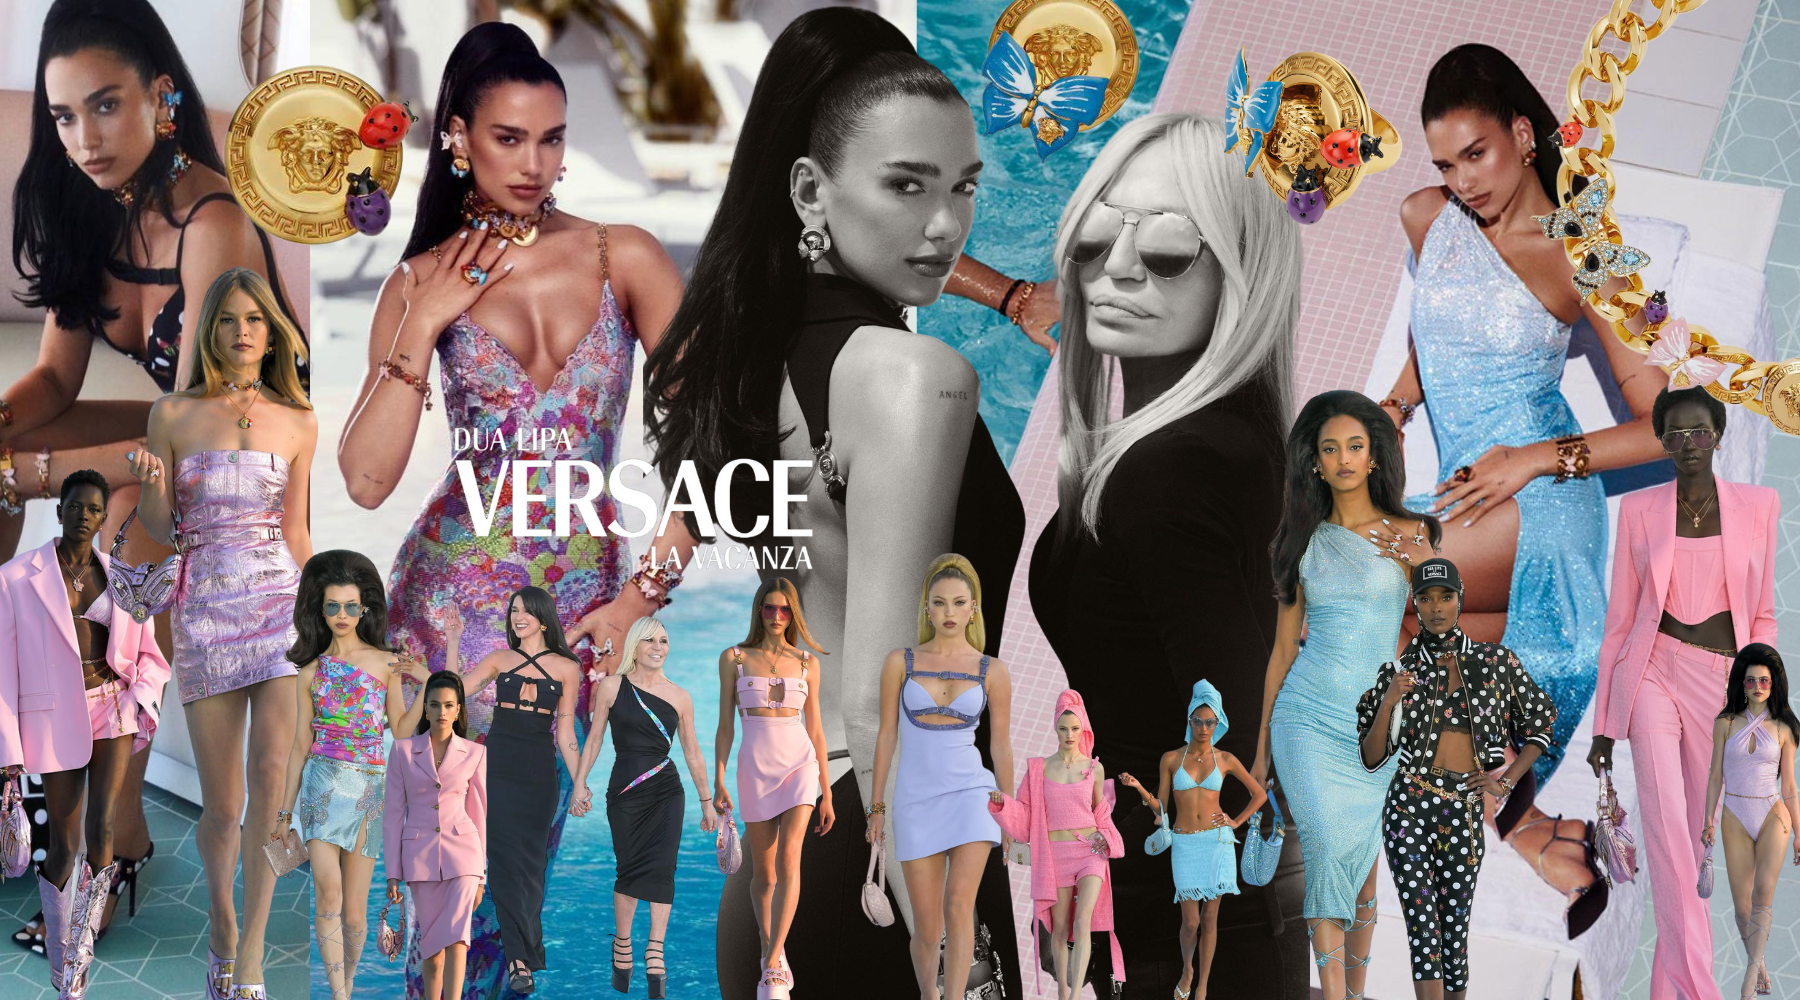 Dua Lipa x La Vacanza: The Collaboration by Versace unveiled in Cannes